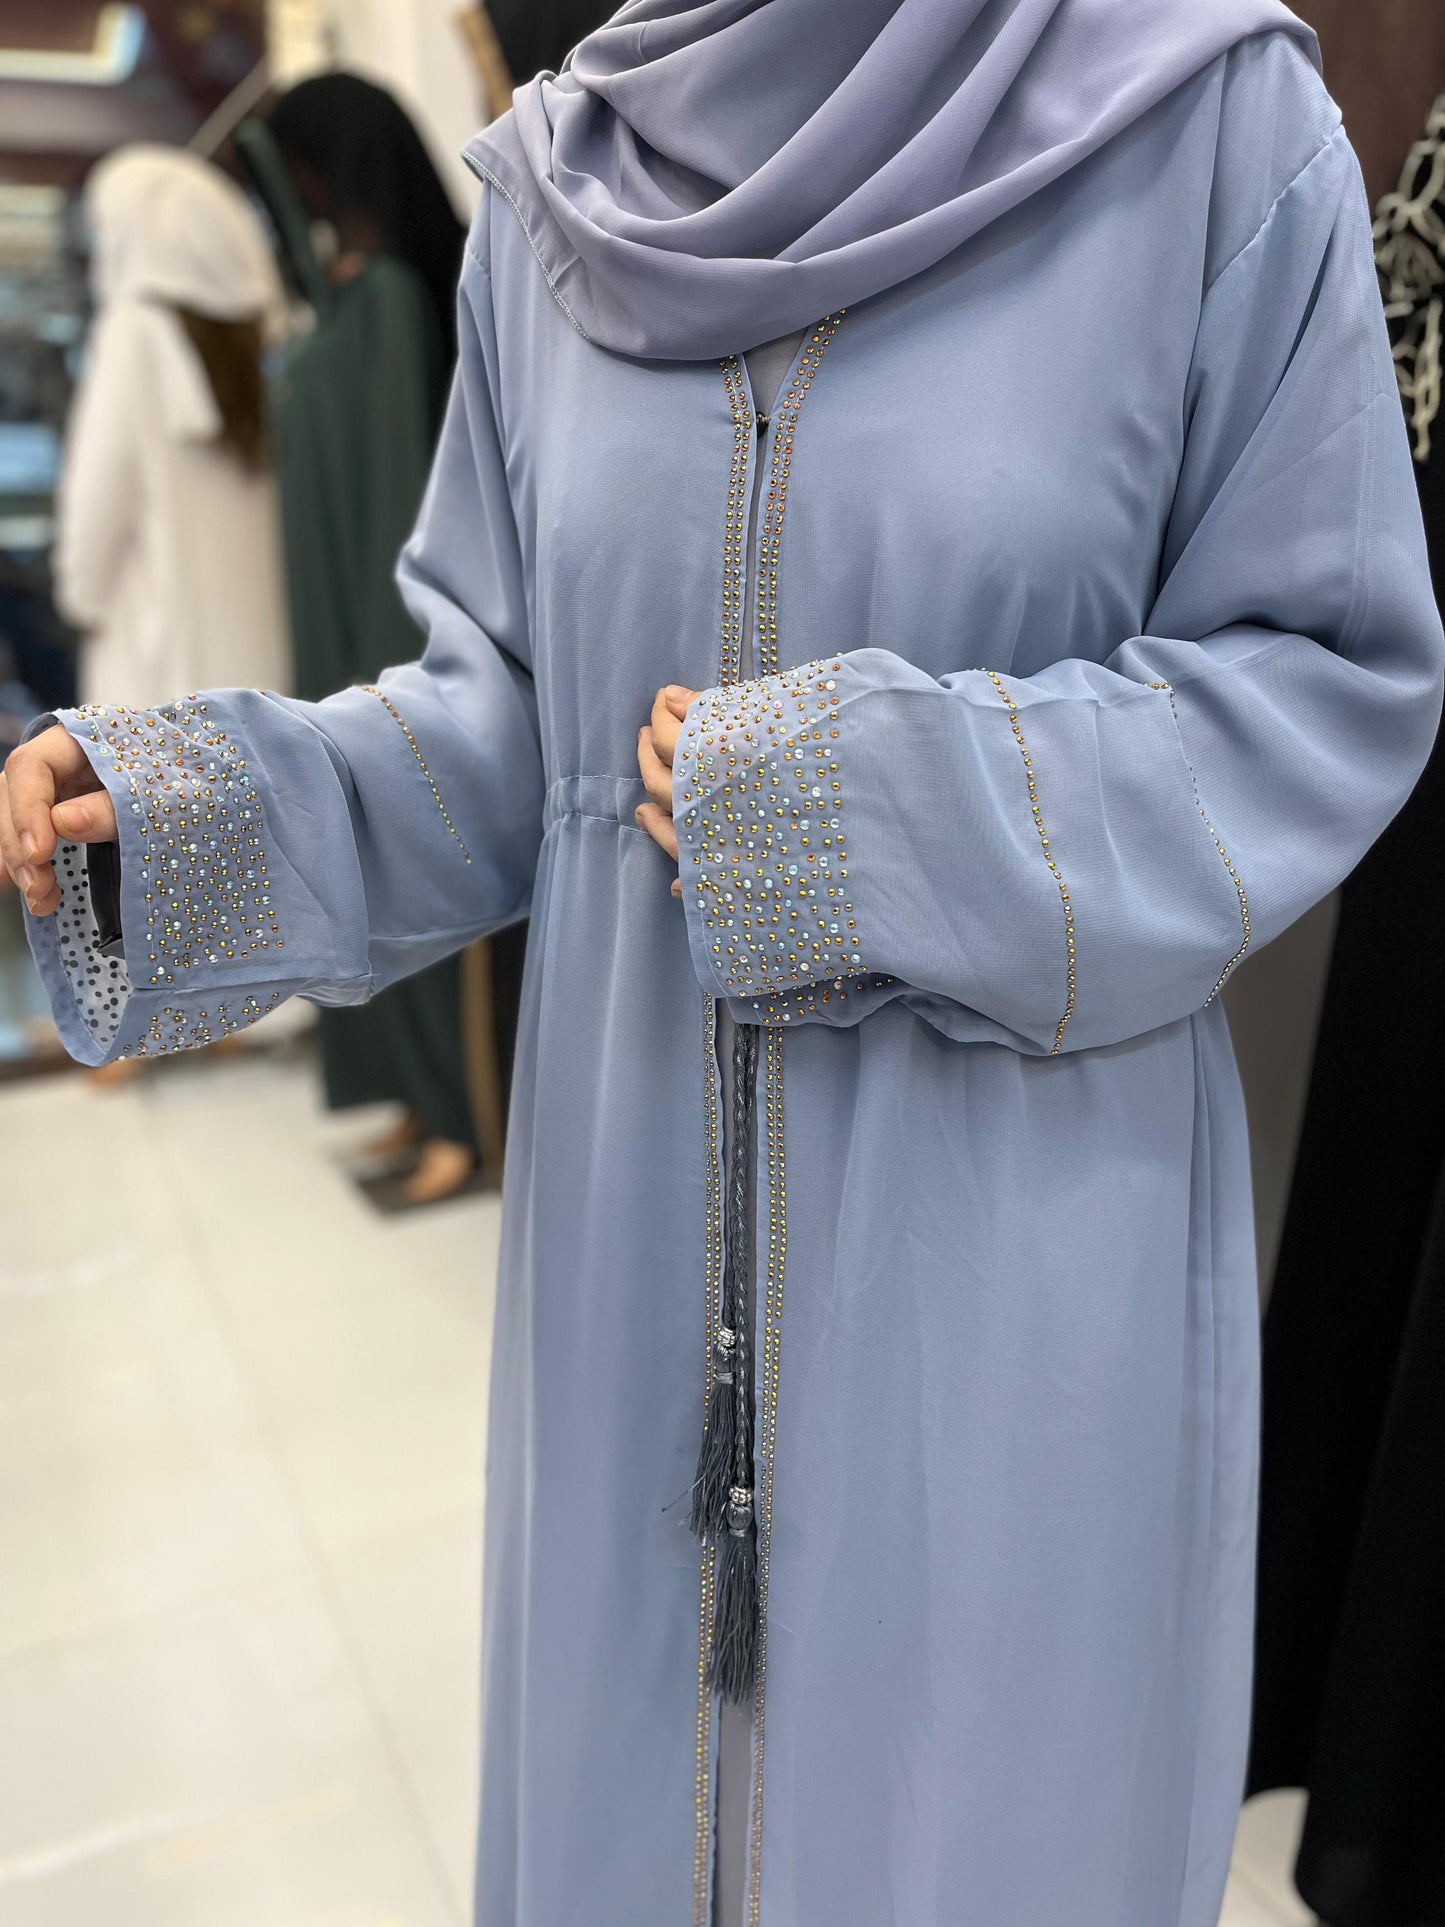 Exquisite Silk Embellished Abaya Collection - Luxurious Islamic Modest Wear for Women, Perfect for Special Occasions and Everyday Glamour